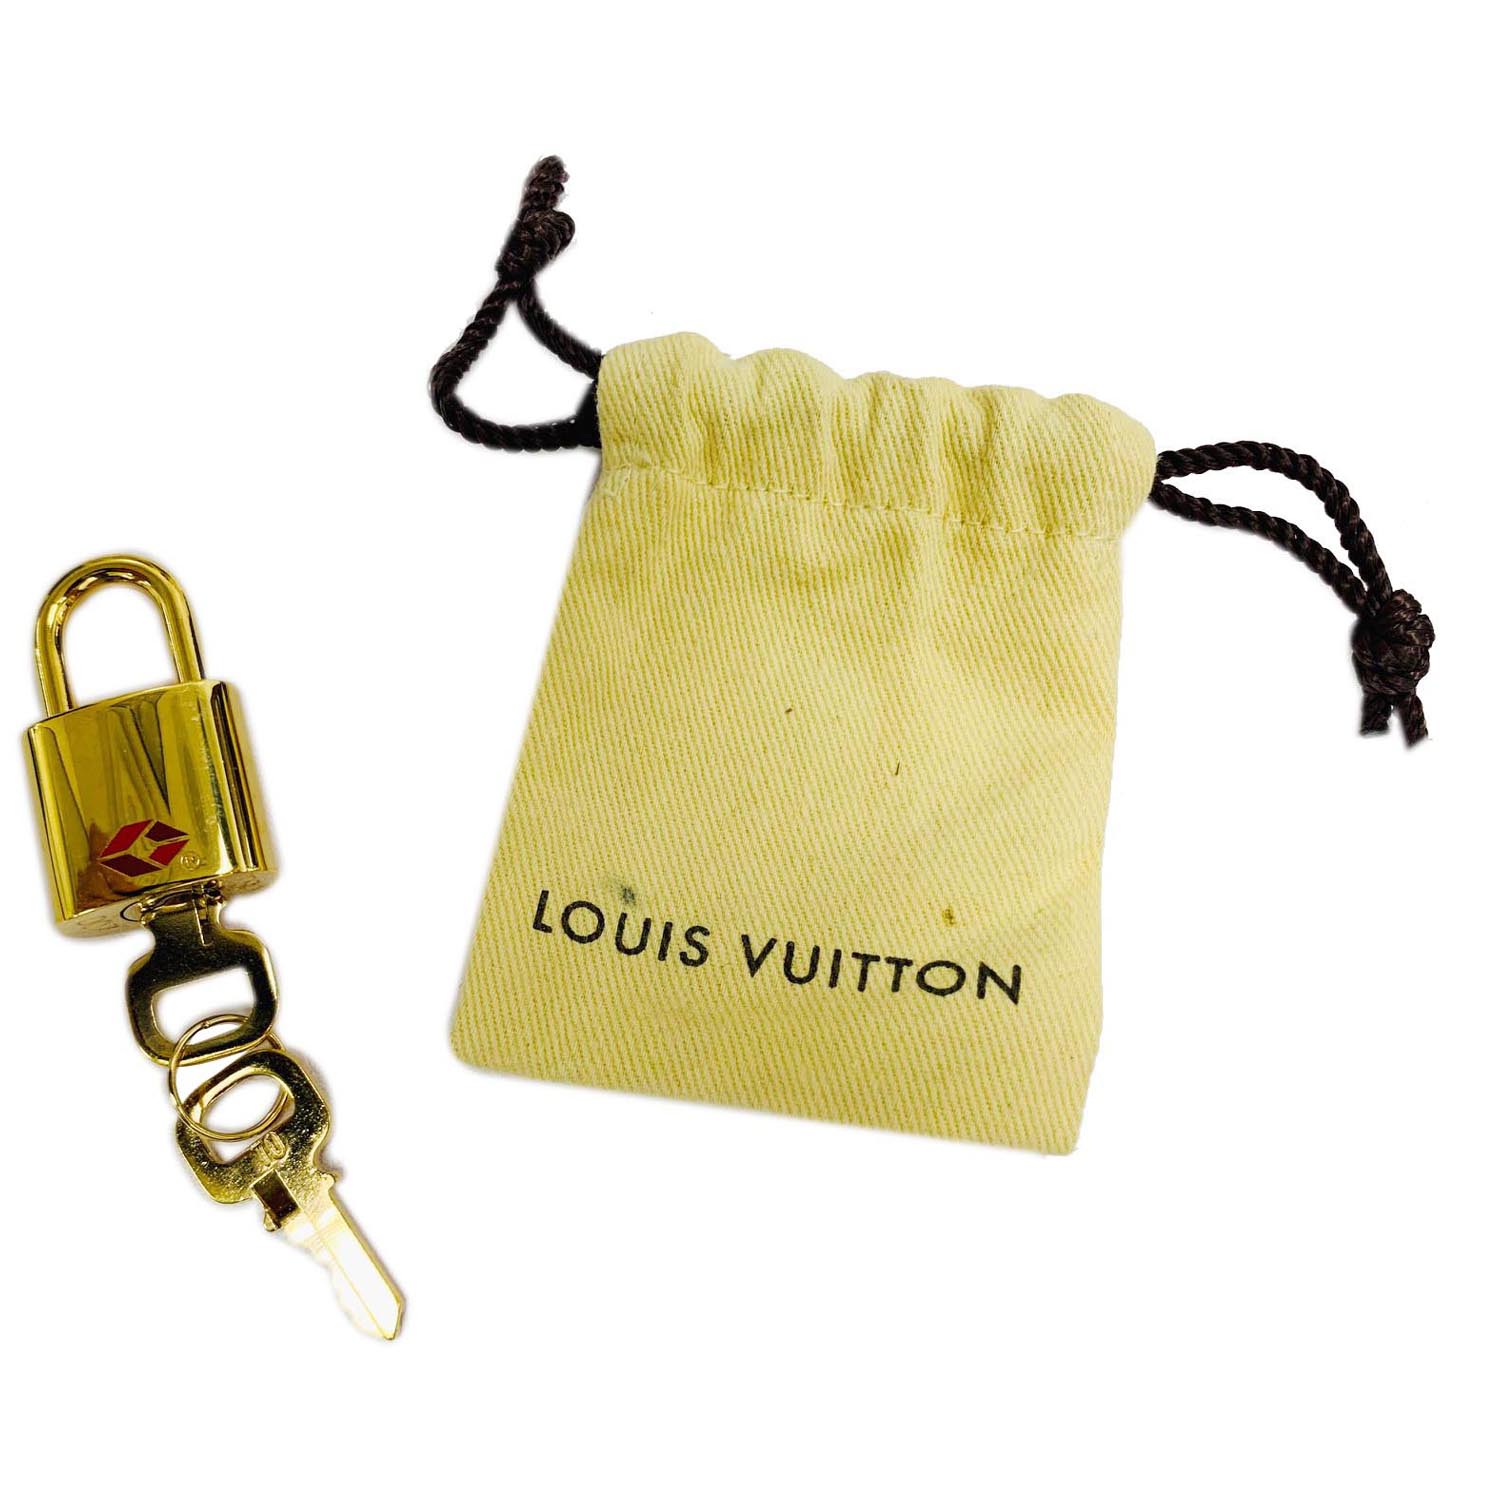 Authentic Louis Vuitton Gold Lock With 2 Keys Bag - PreLoved Treasures